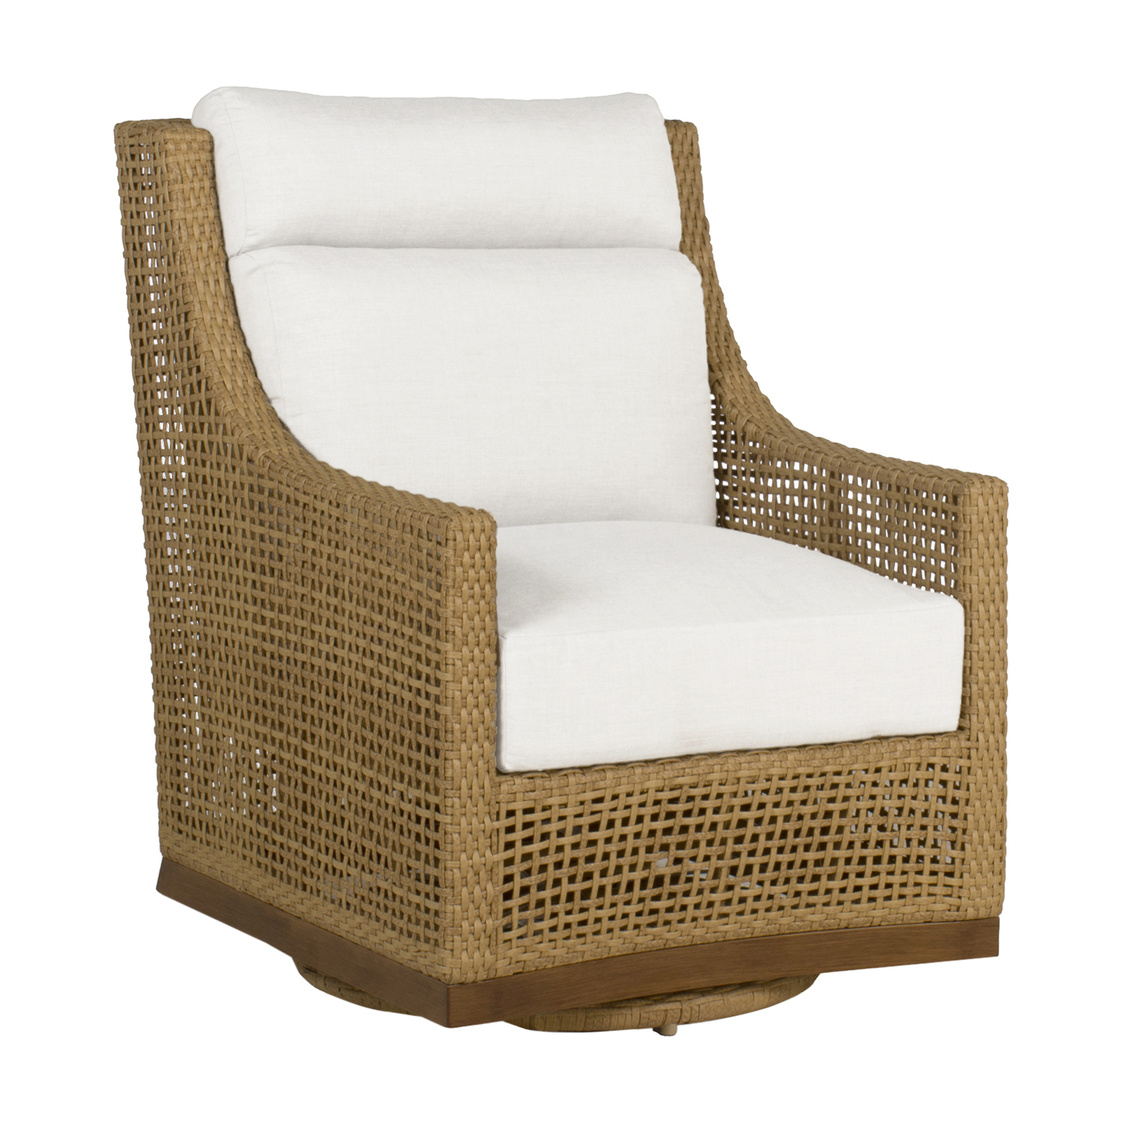 peninsula swivel glide chair in raffia/sandalwood – frame only product image